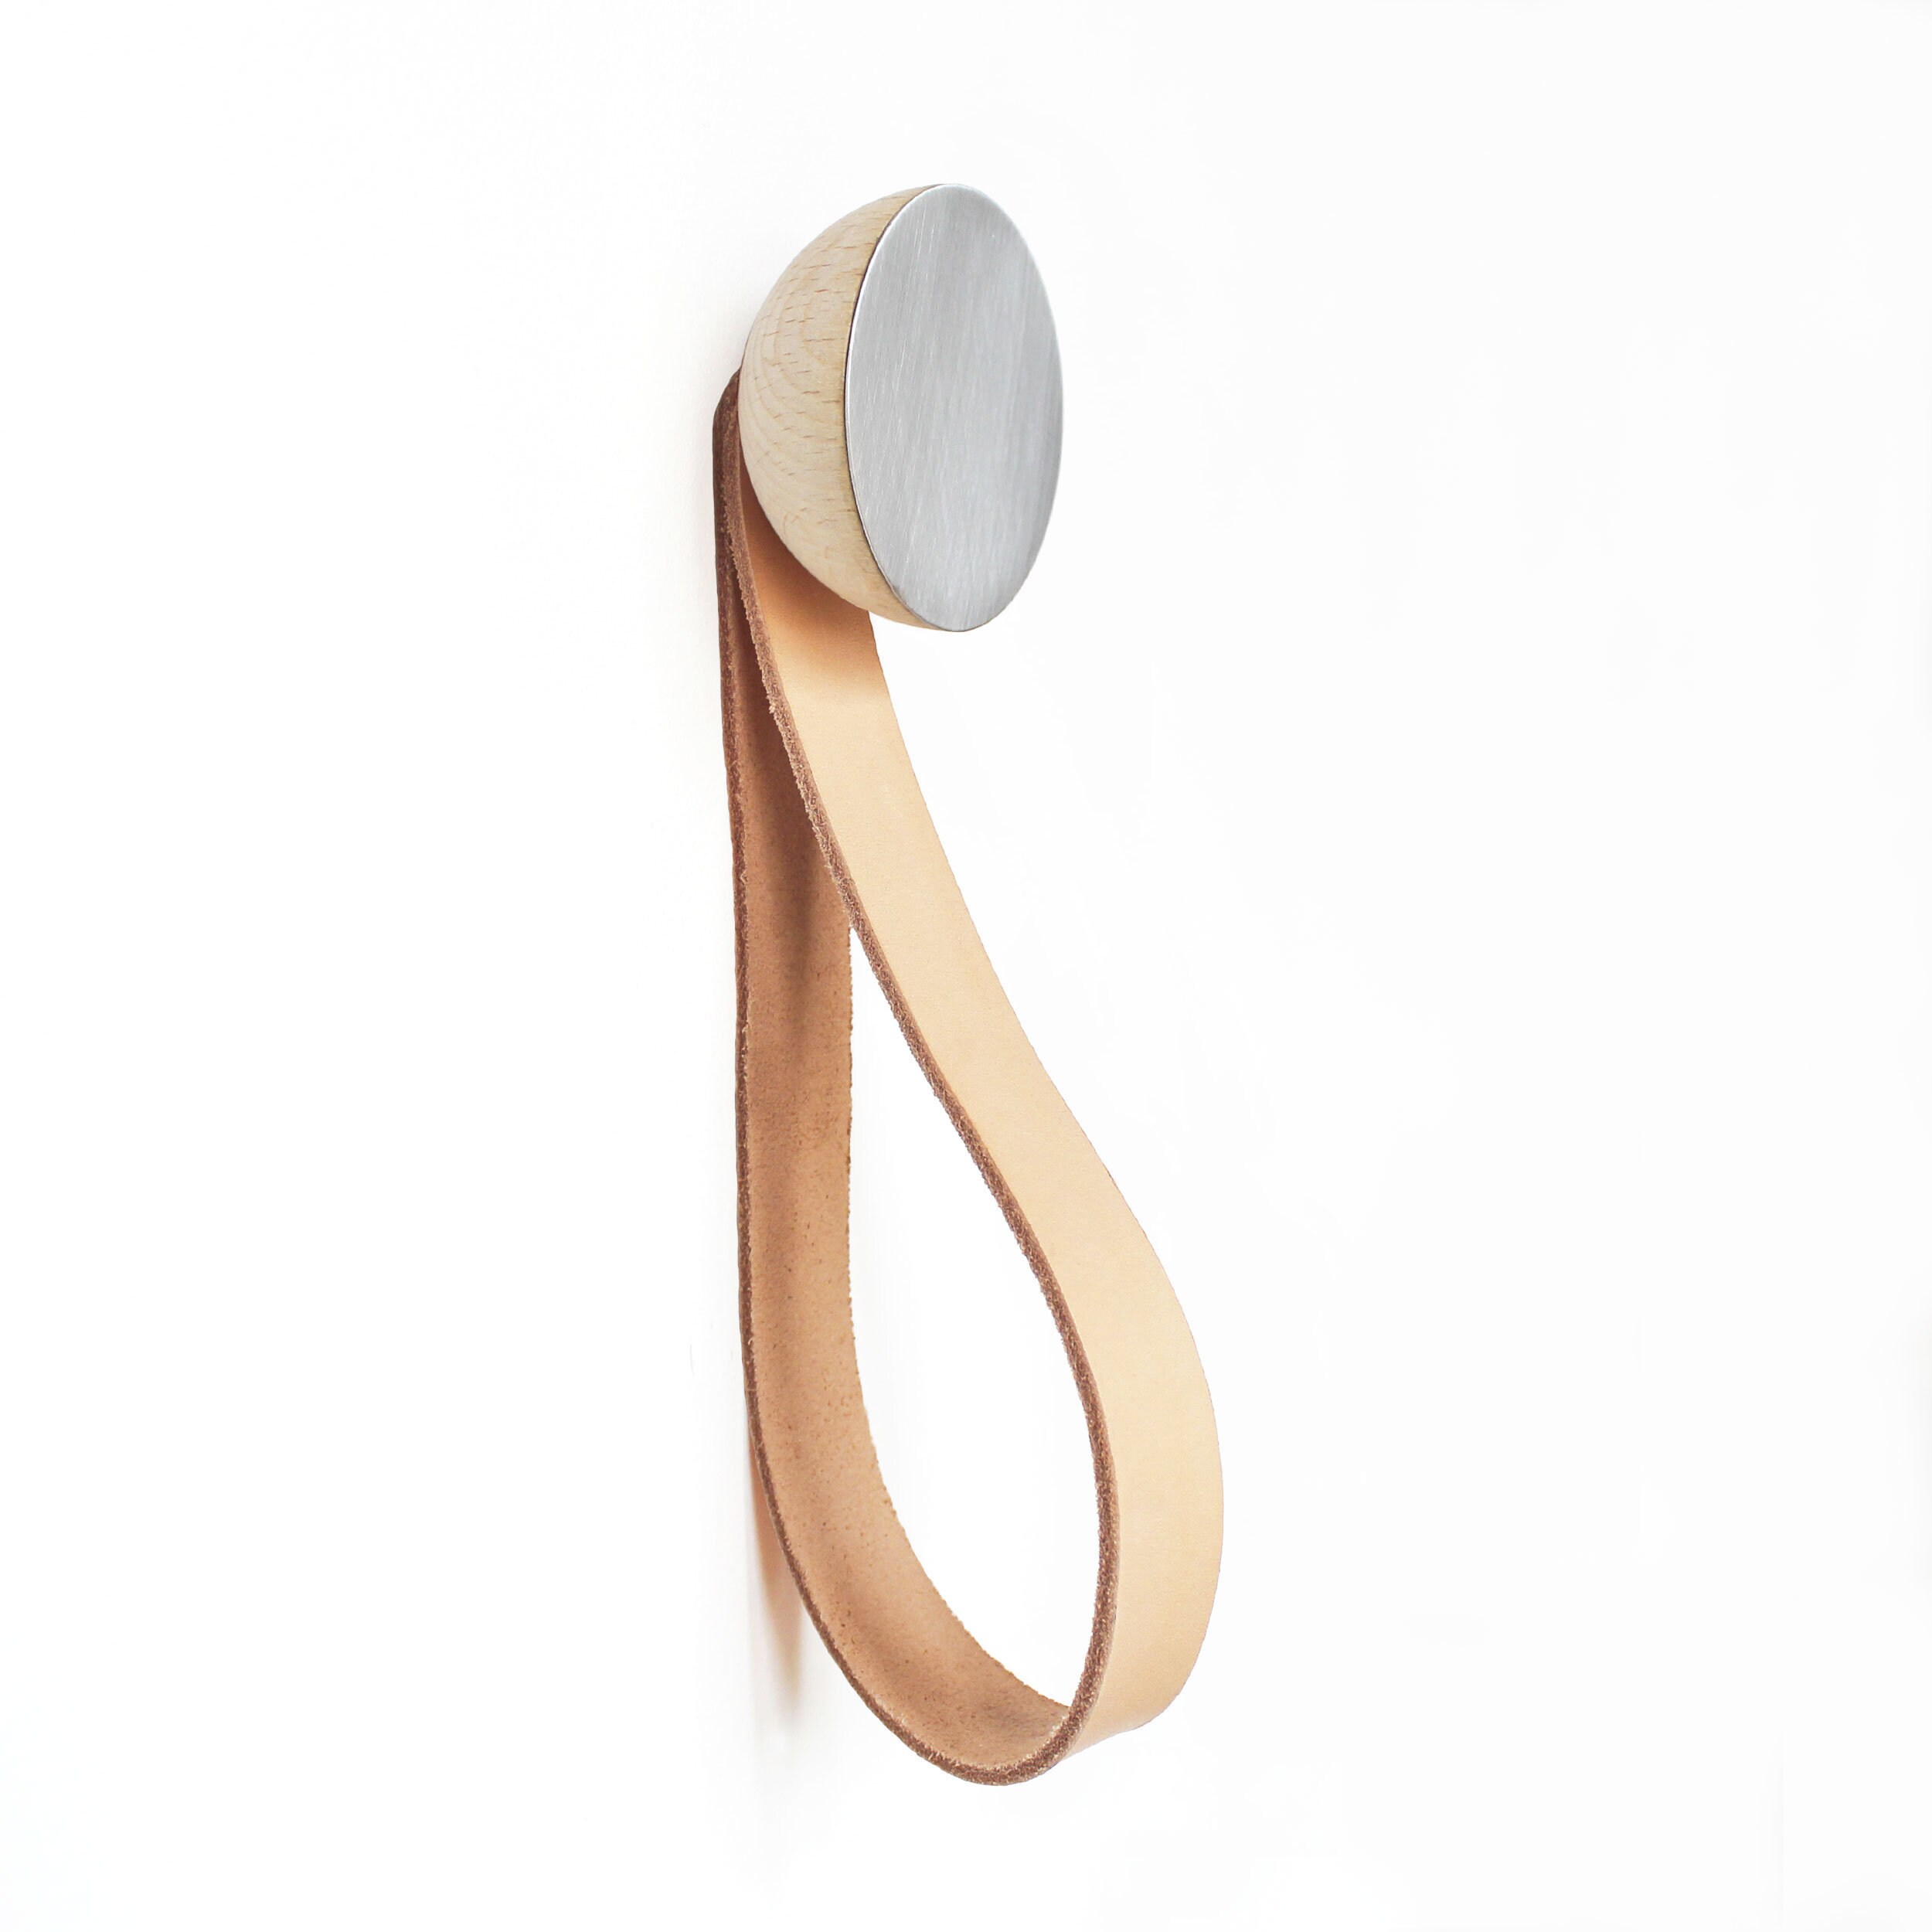 Round Beech Wood Wall Mounted Coat Hook / Hanger with Leather Strap – 5mm  Paper